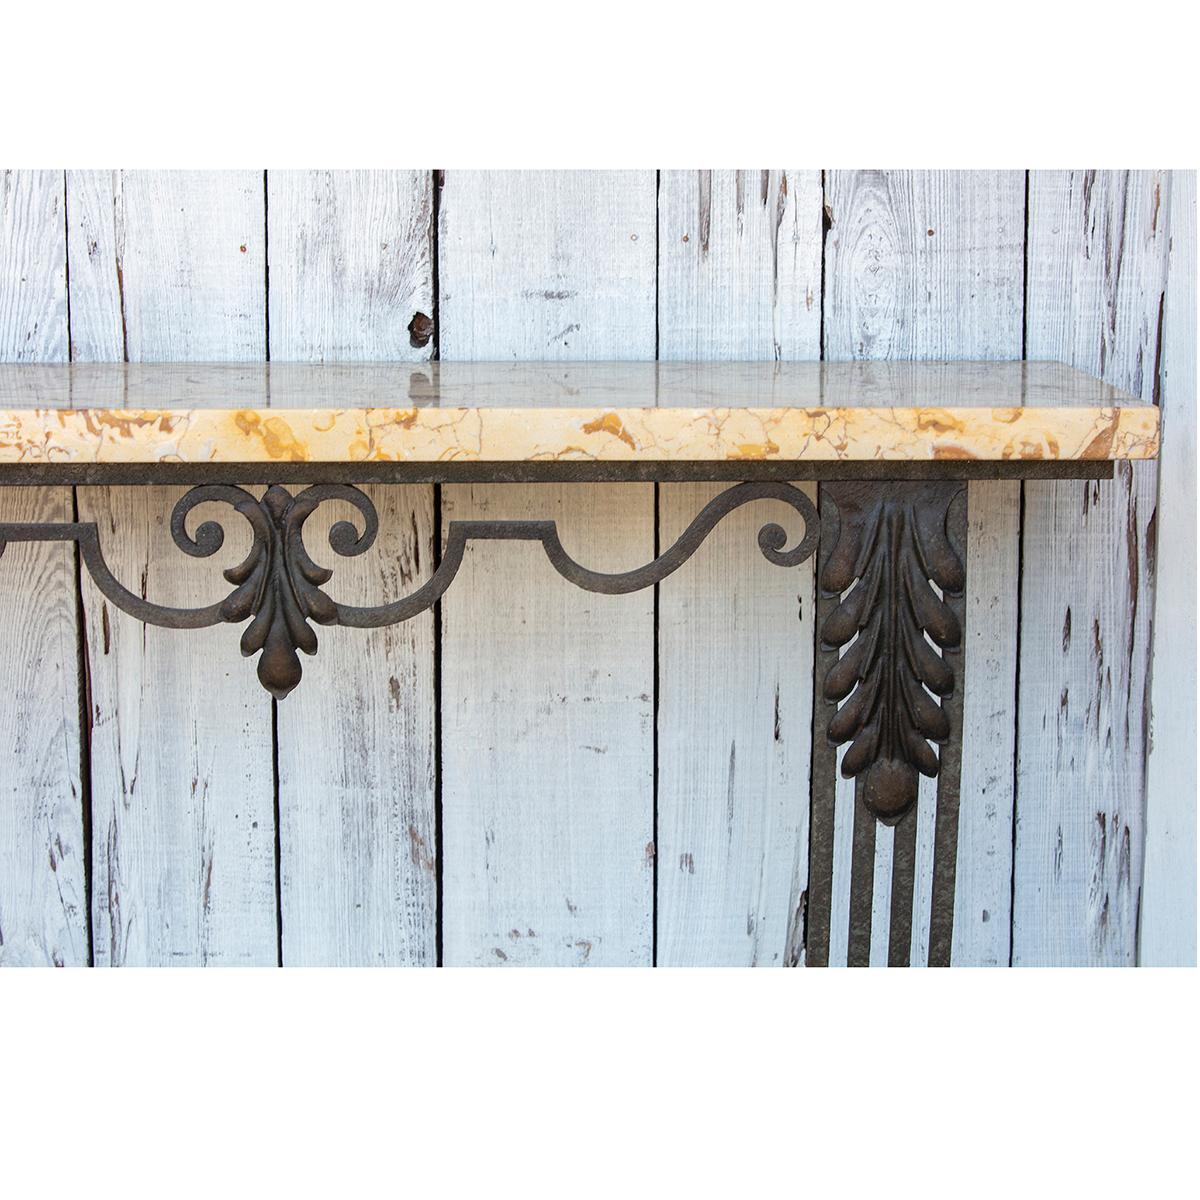 Wrought Iron wall mount console table with Art Nouveau designs. The marble top has beiges and browns and sits above a simple iron apron. Two Art Deco style bracket legs support the whole.